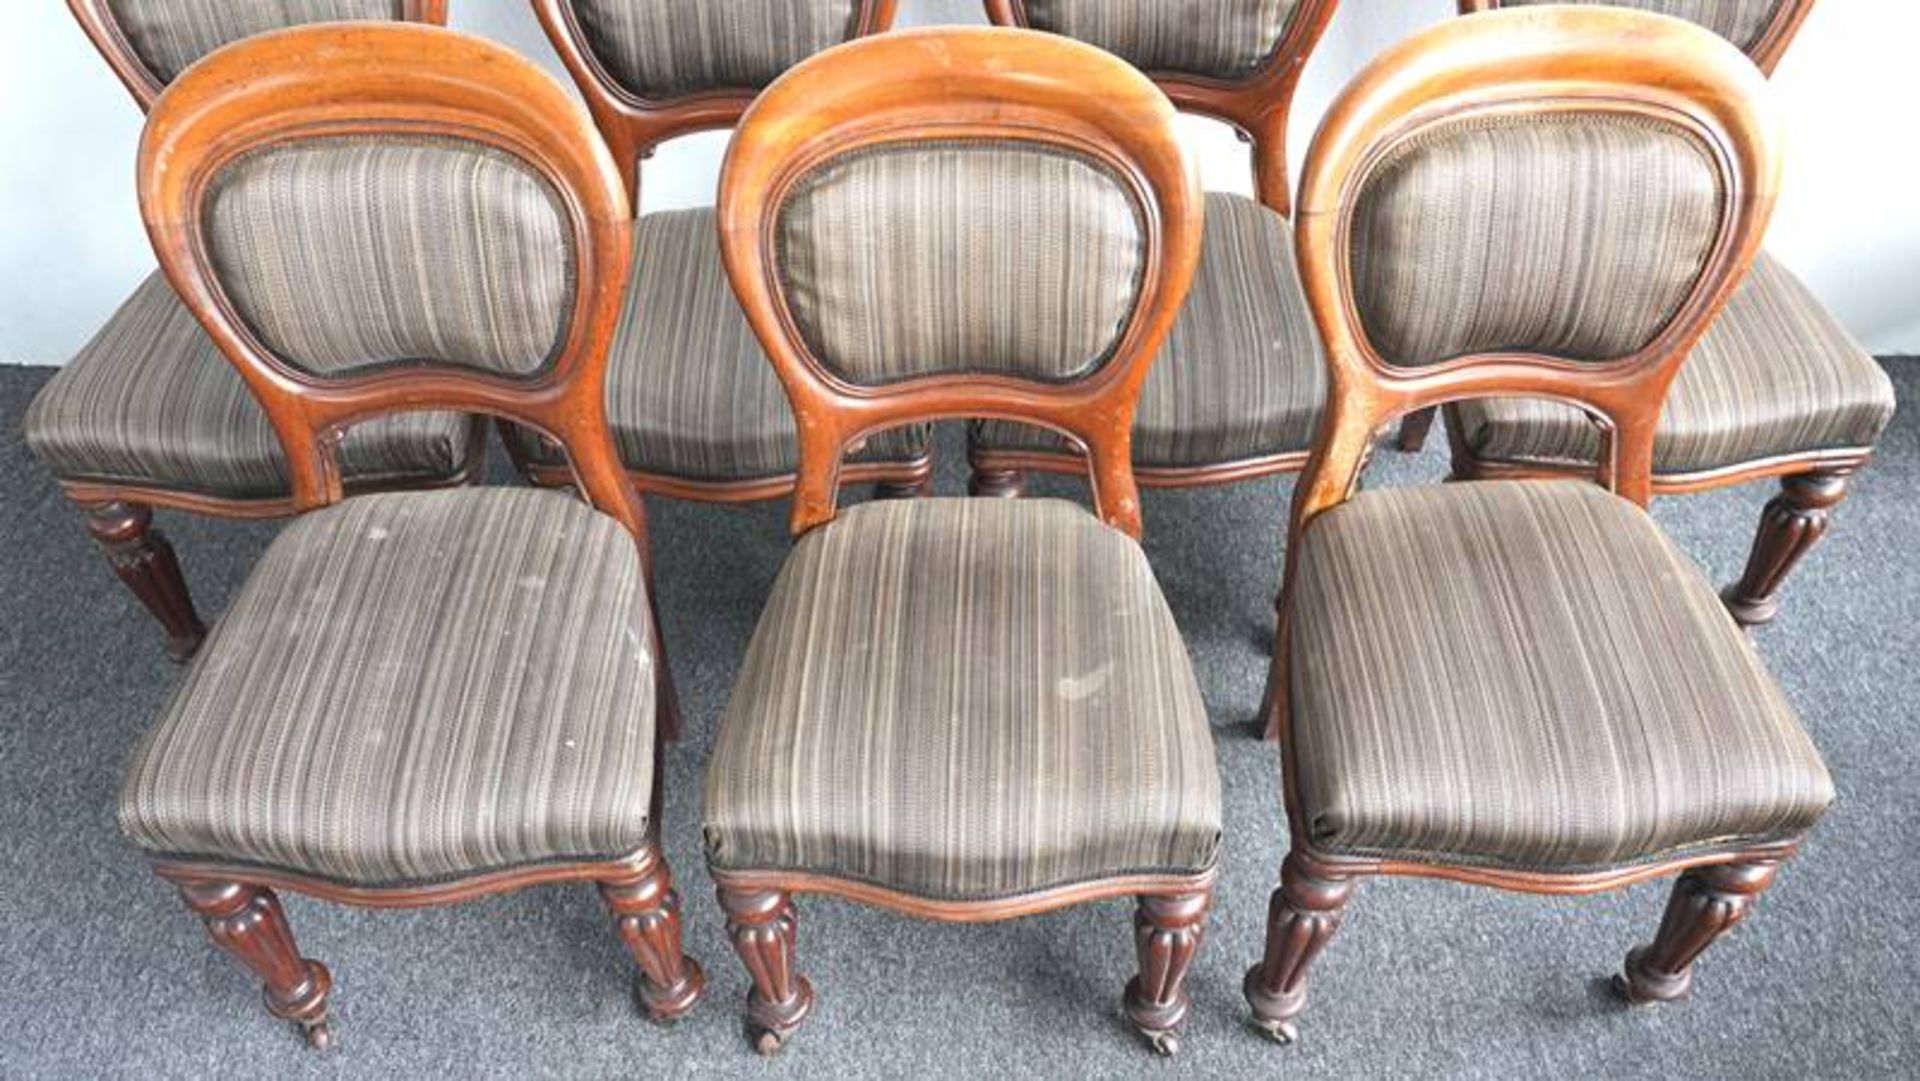 7 Louis Philippe chairs - Image 2 of 6